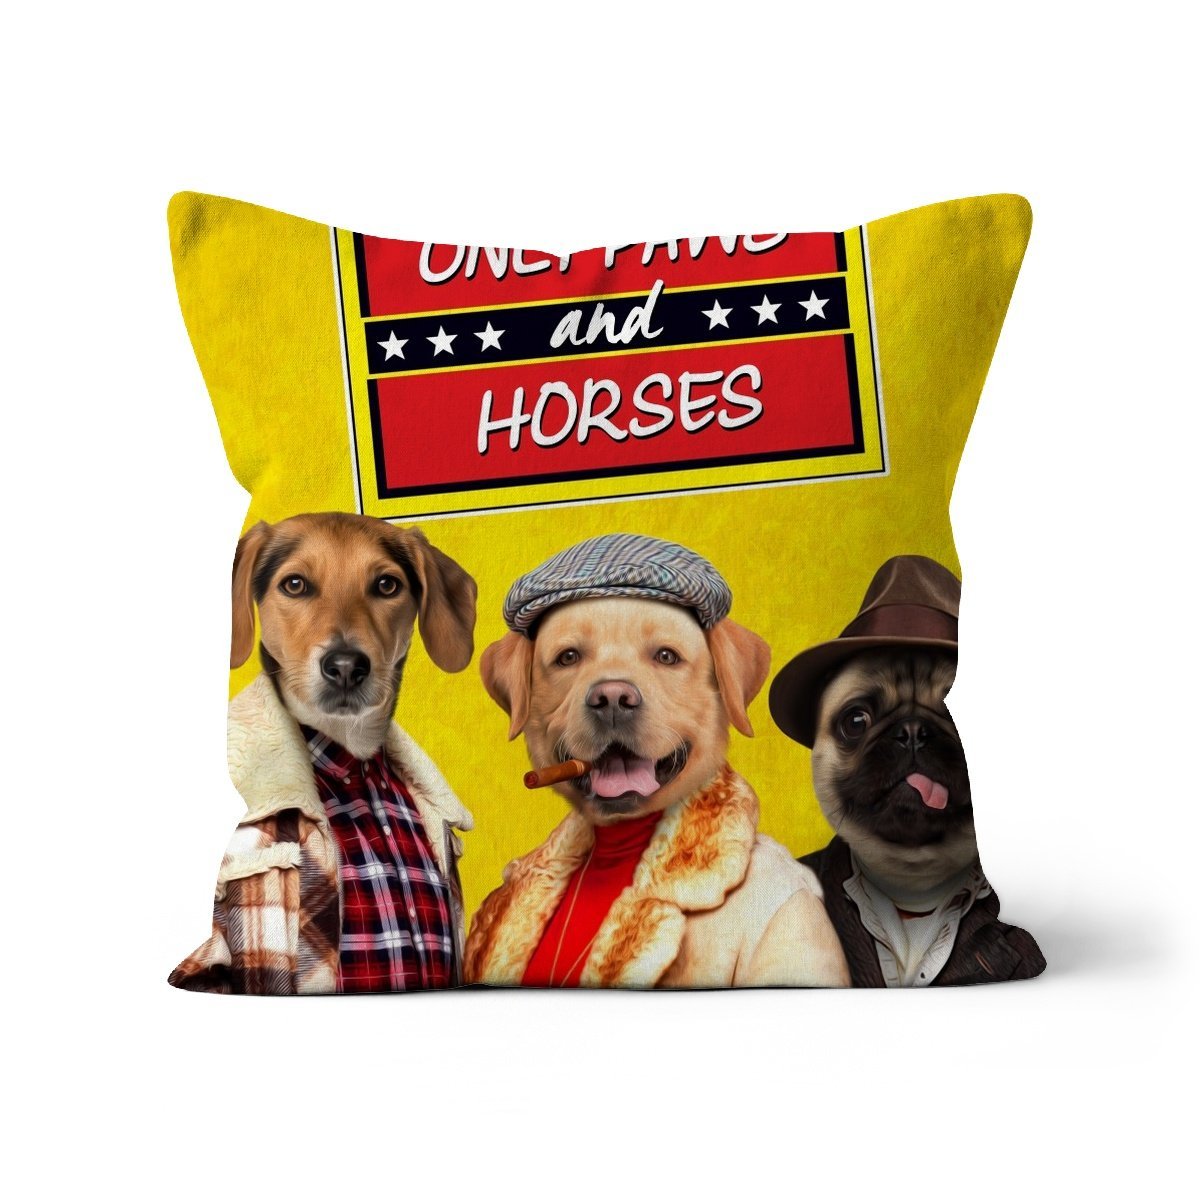 Only Paws and Horses: Custom 3 Pet Cushion - Paw & Glory - #pet portraits# - #dog portraits# - #pet portraits uk#paw and glory, pet portraits cushion,pillows of your dog, dog on pillow, photo pet pillow, custom pillow of pet, dog personalized pillow